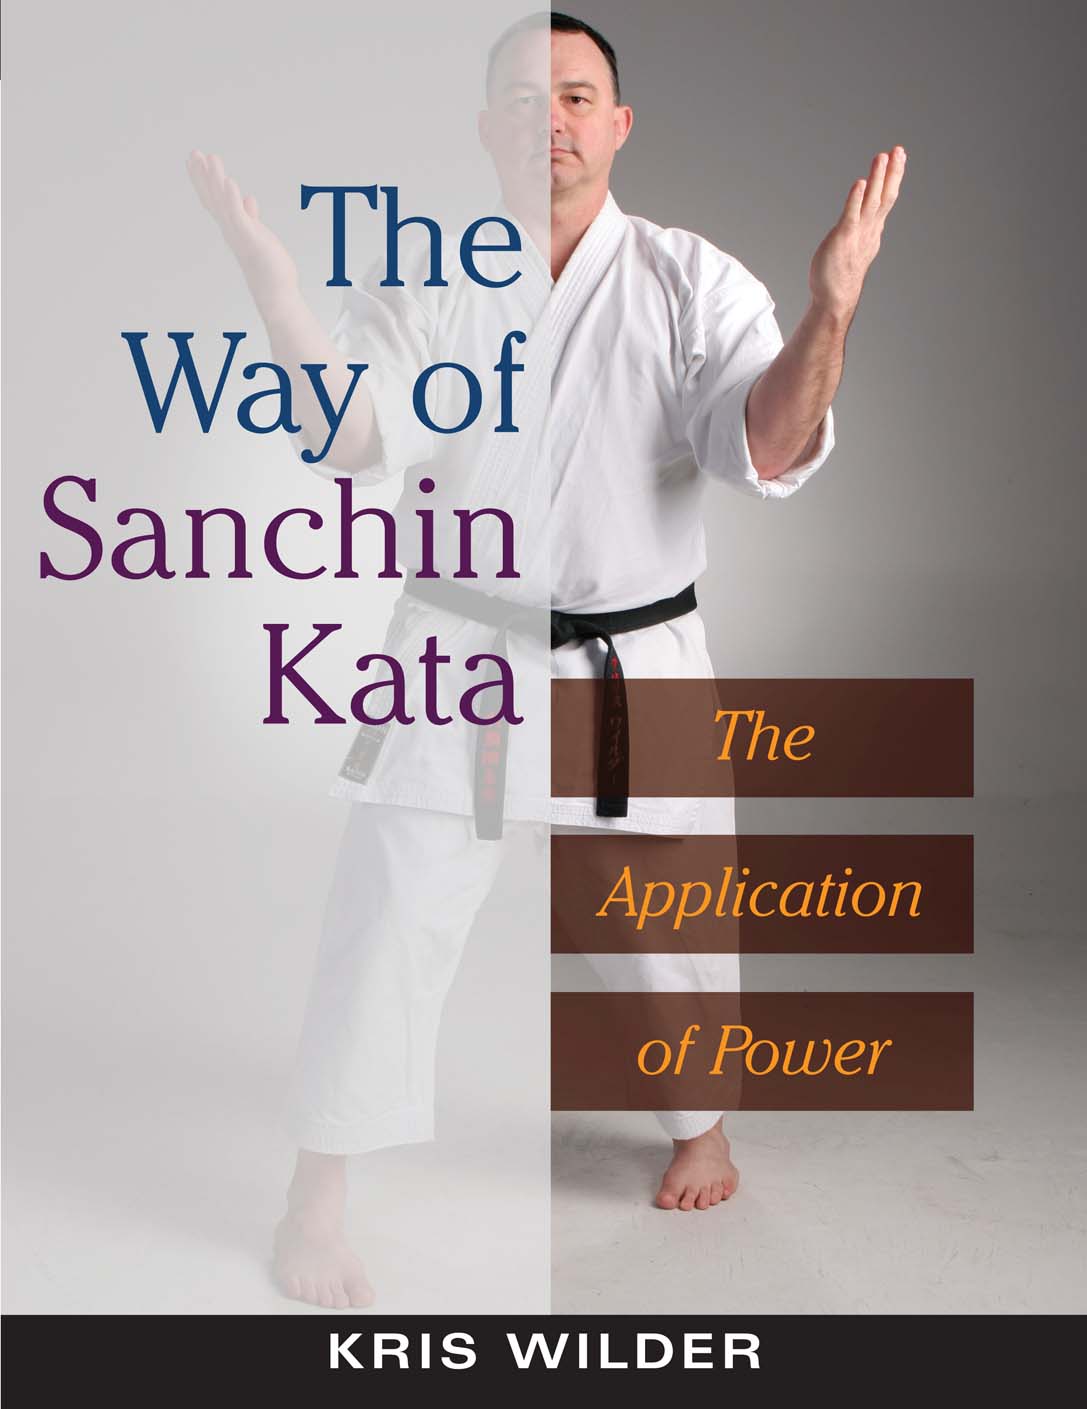 The Way of Sanchin Kata—The Application of Power Book by Kris Wilder